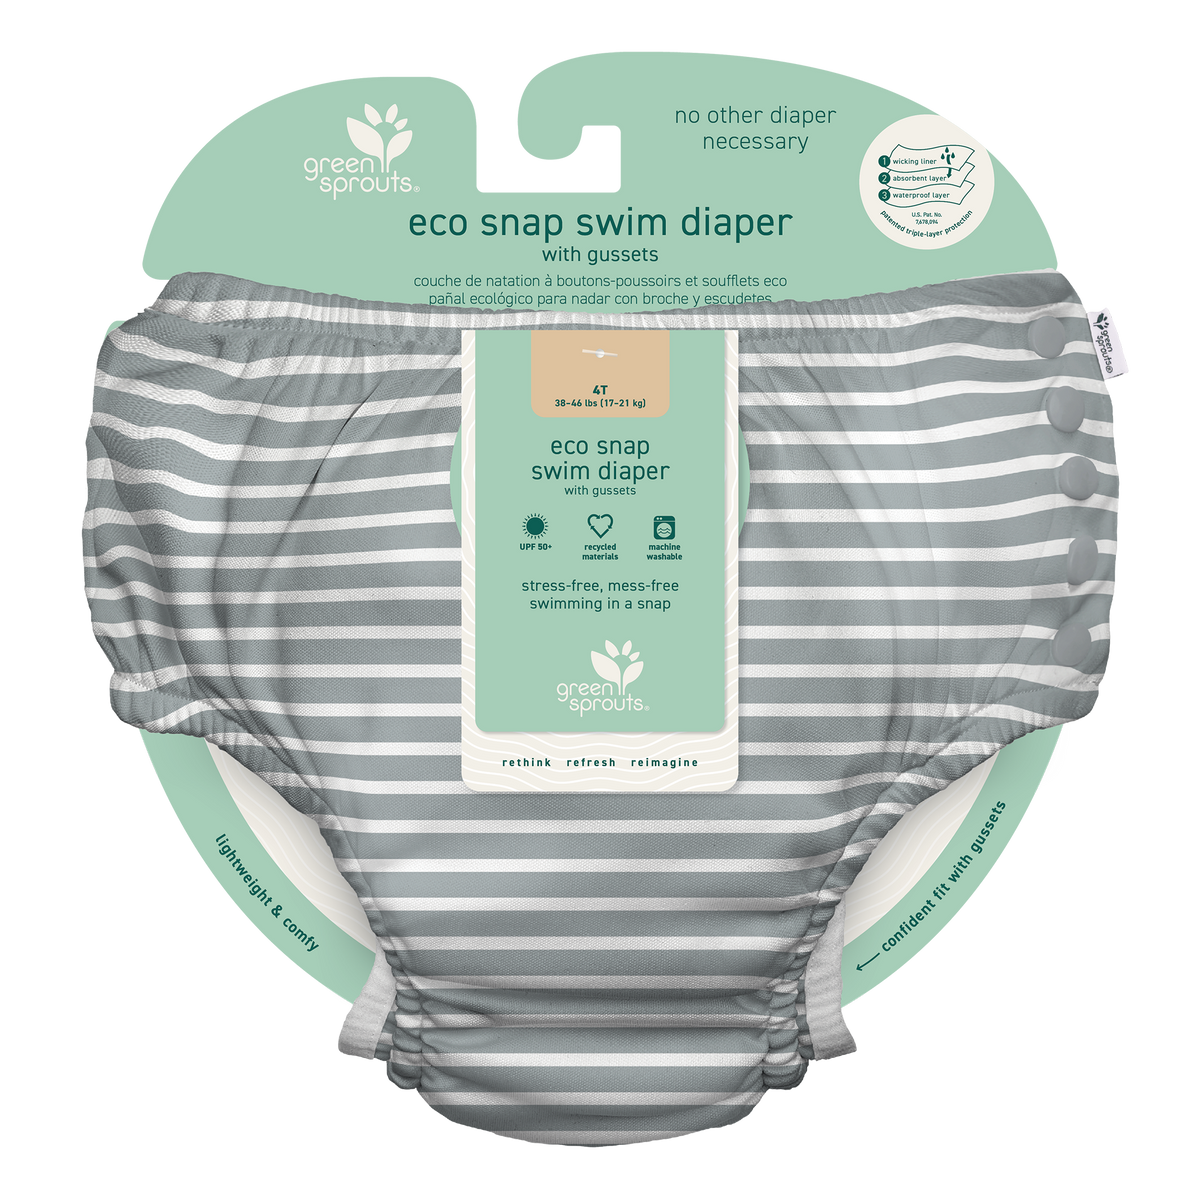 Eco Snap Swim Diaper with Gussets